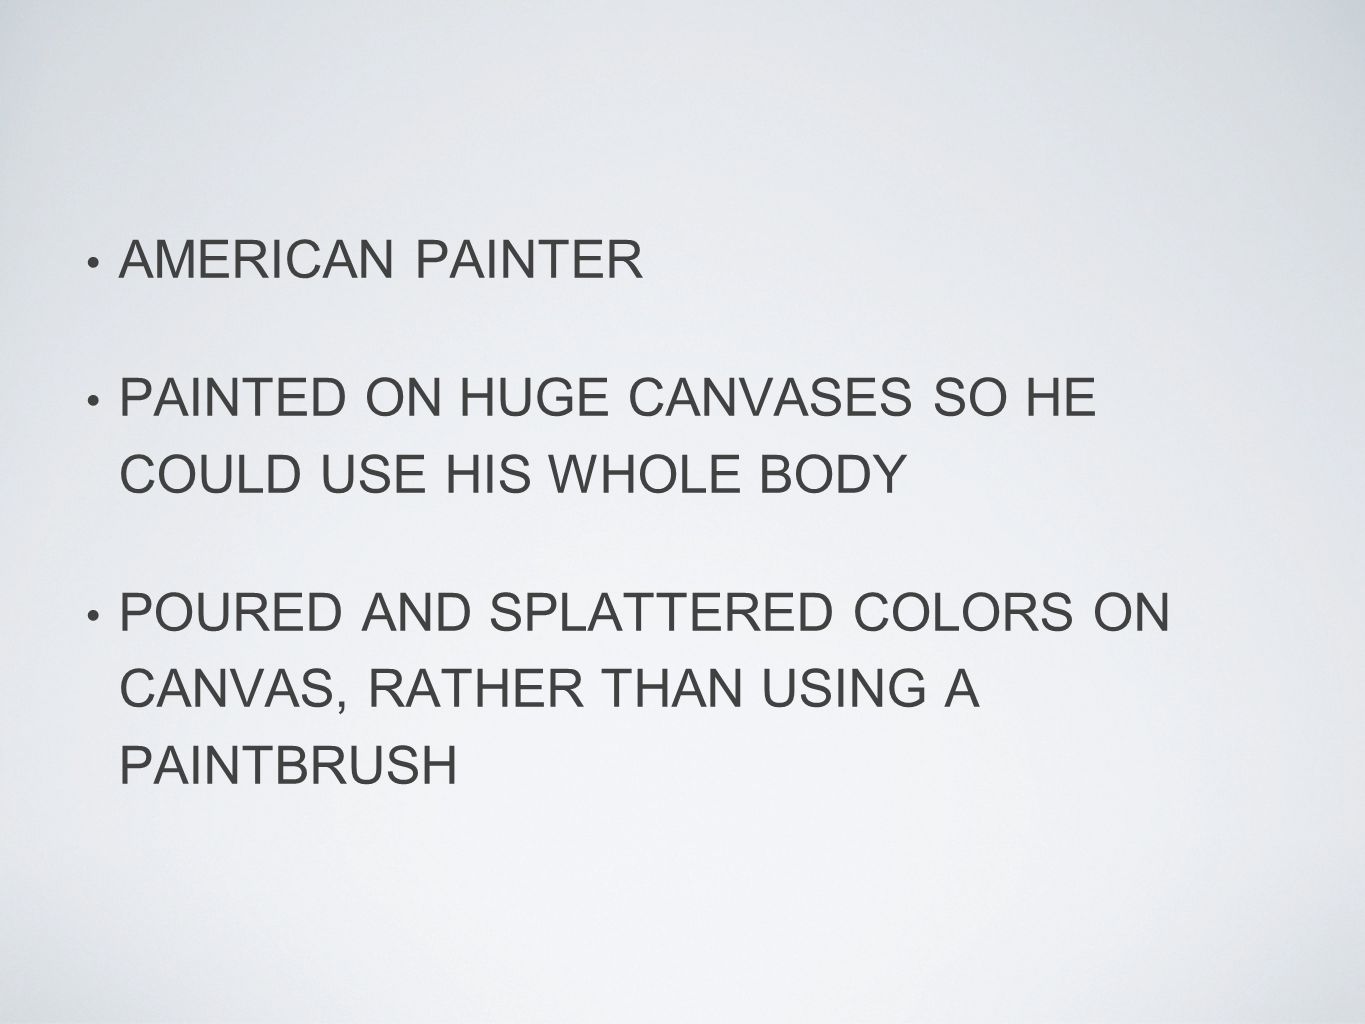 AMERICAN PAINTER PAINTED ON HUGE CANVASES SO HE COULD USE HIS WHOLE BODY POURED AND SPLATTERED COLORS ON CANVAS, RATHER THAN USING A PAINTBRUSH